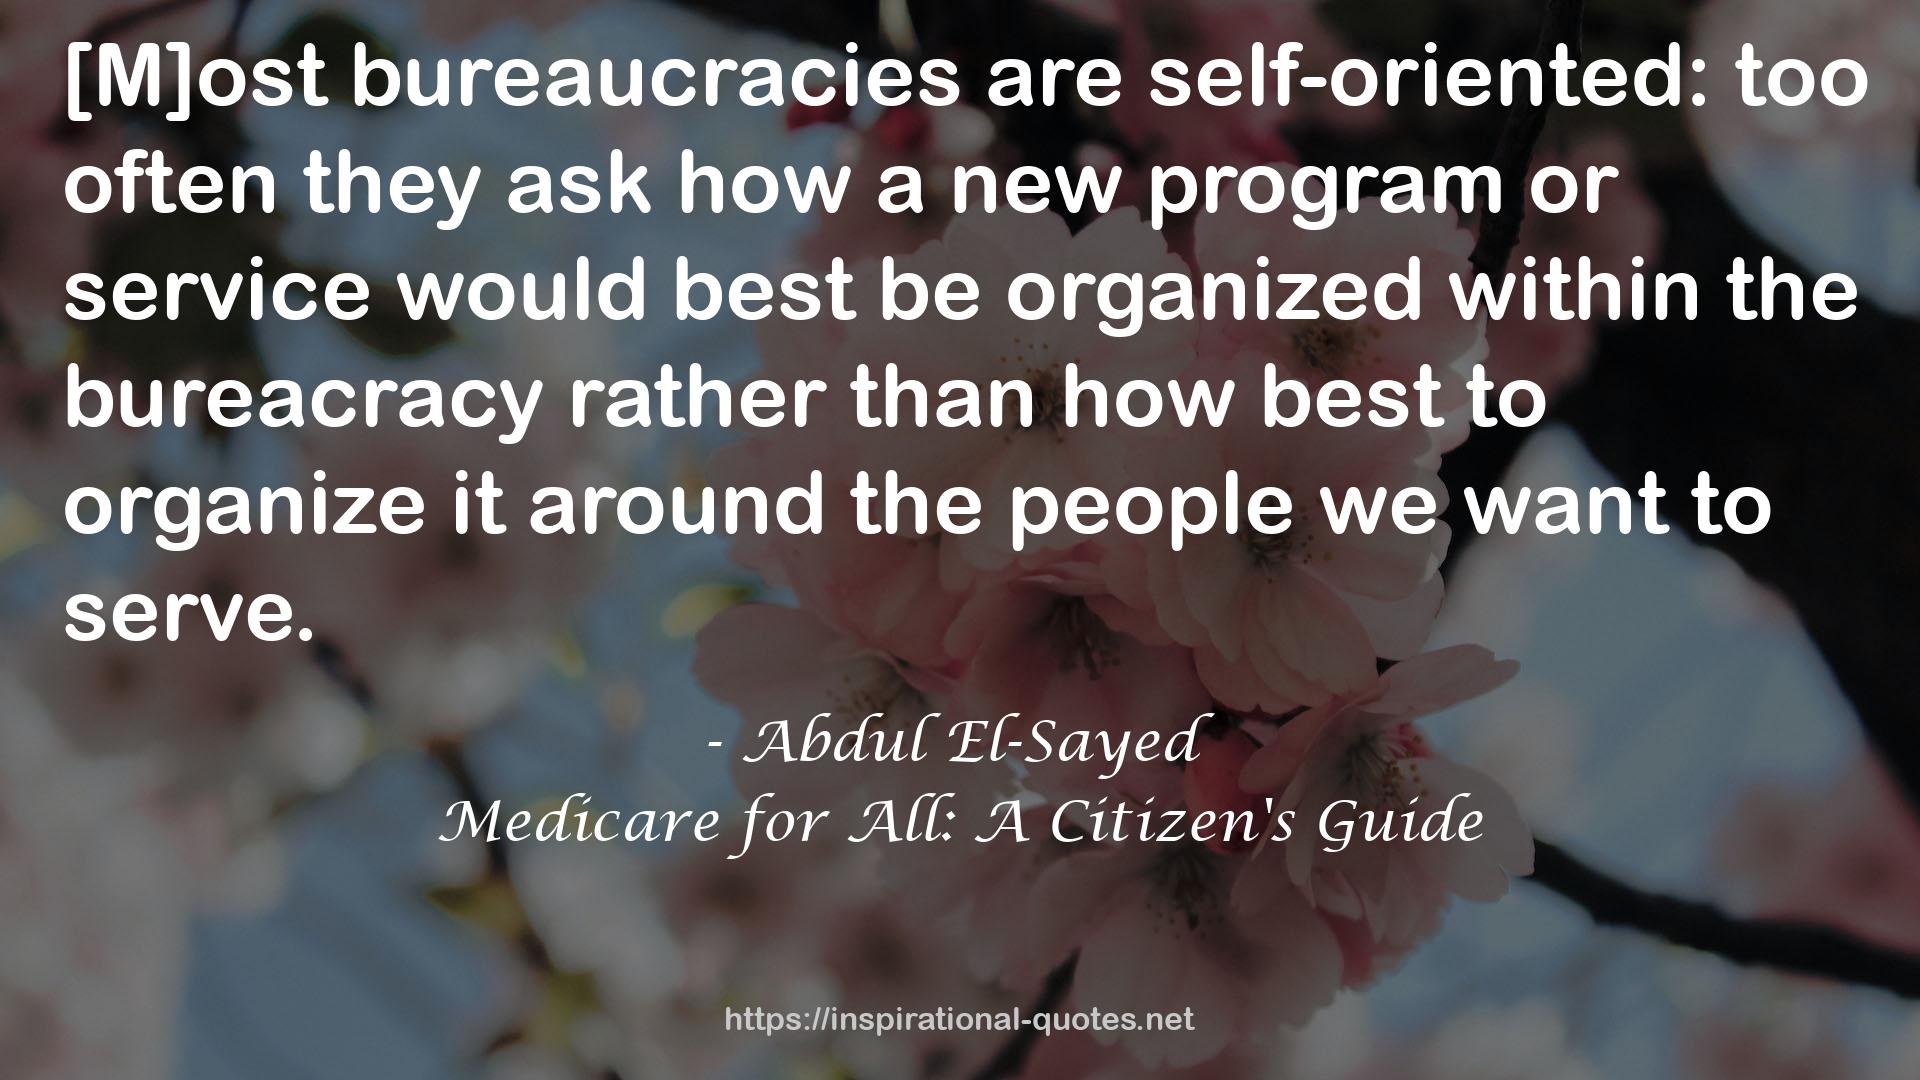 Medicare for All: A Citizen's Guide QUOTES